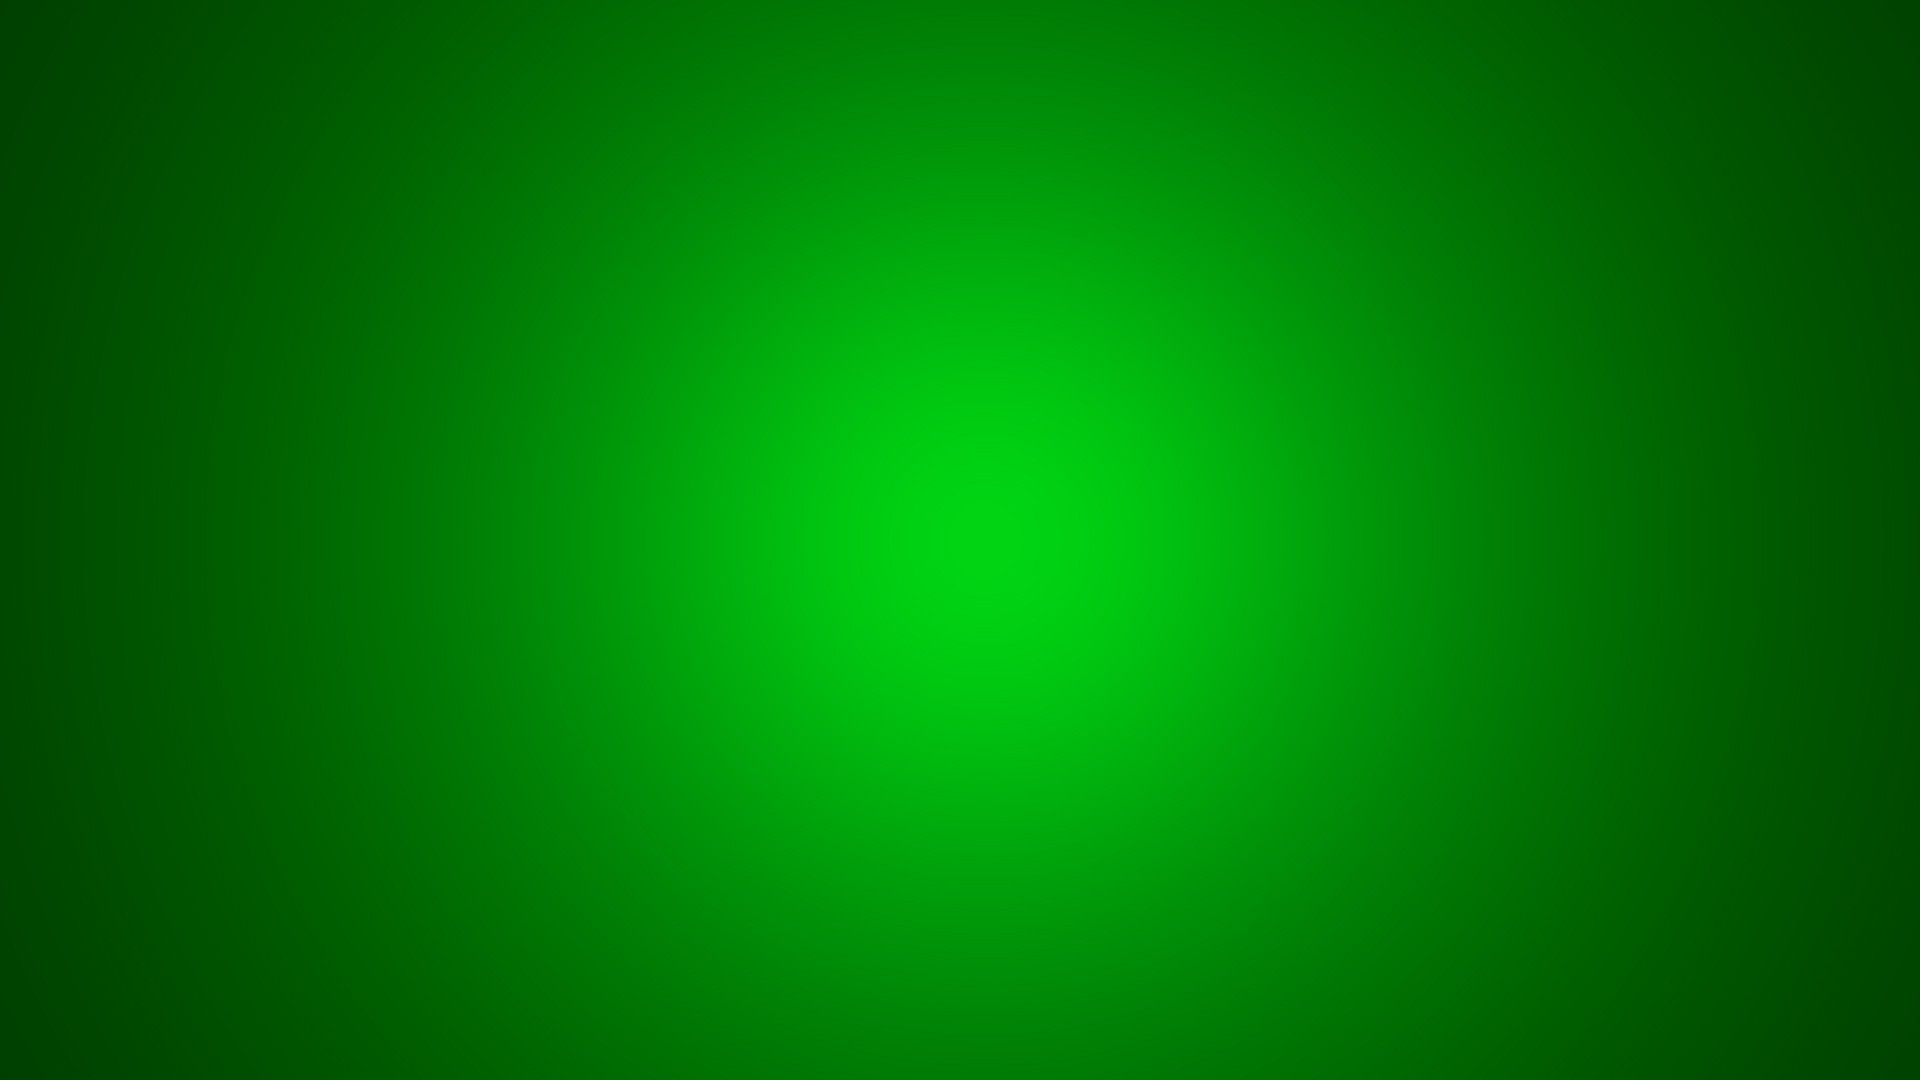 Related wallpapers from Plain Green Background